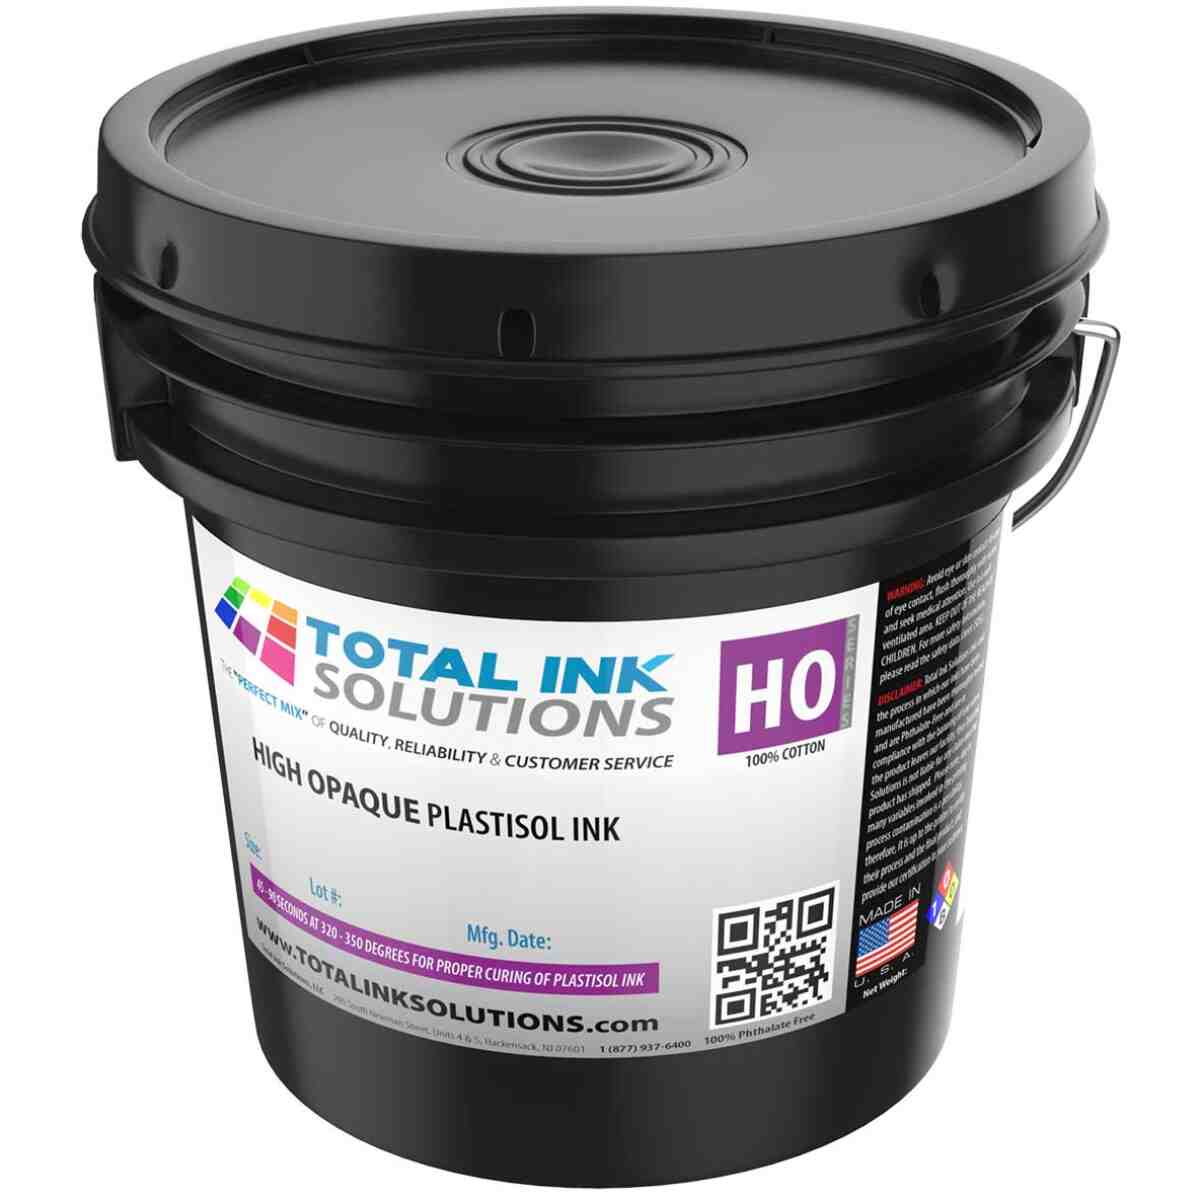 High Opaque Plastisol Ink – Colors-Gallon TOTAL INK SOLUTIONS®